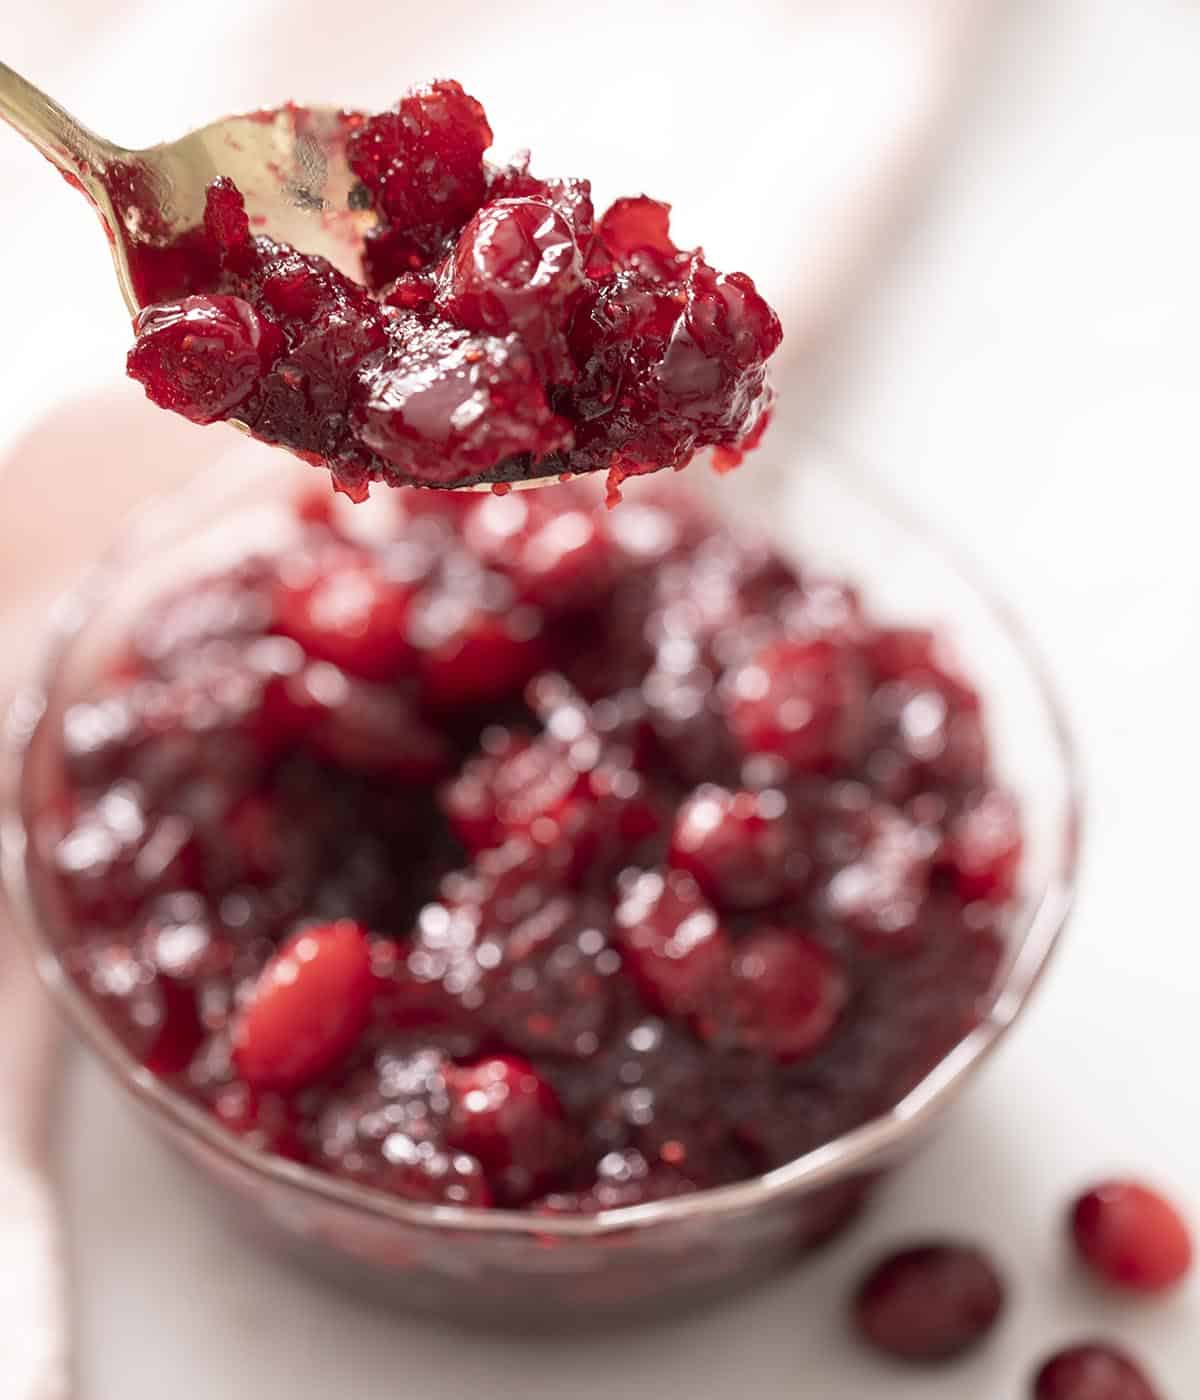 A spoon lifting cranberry sauce from a bowl.